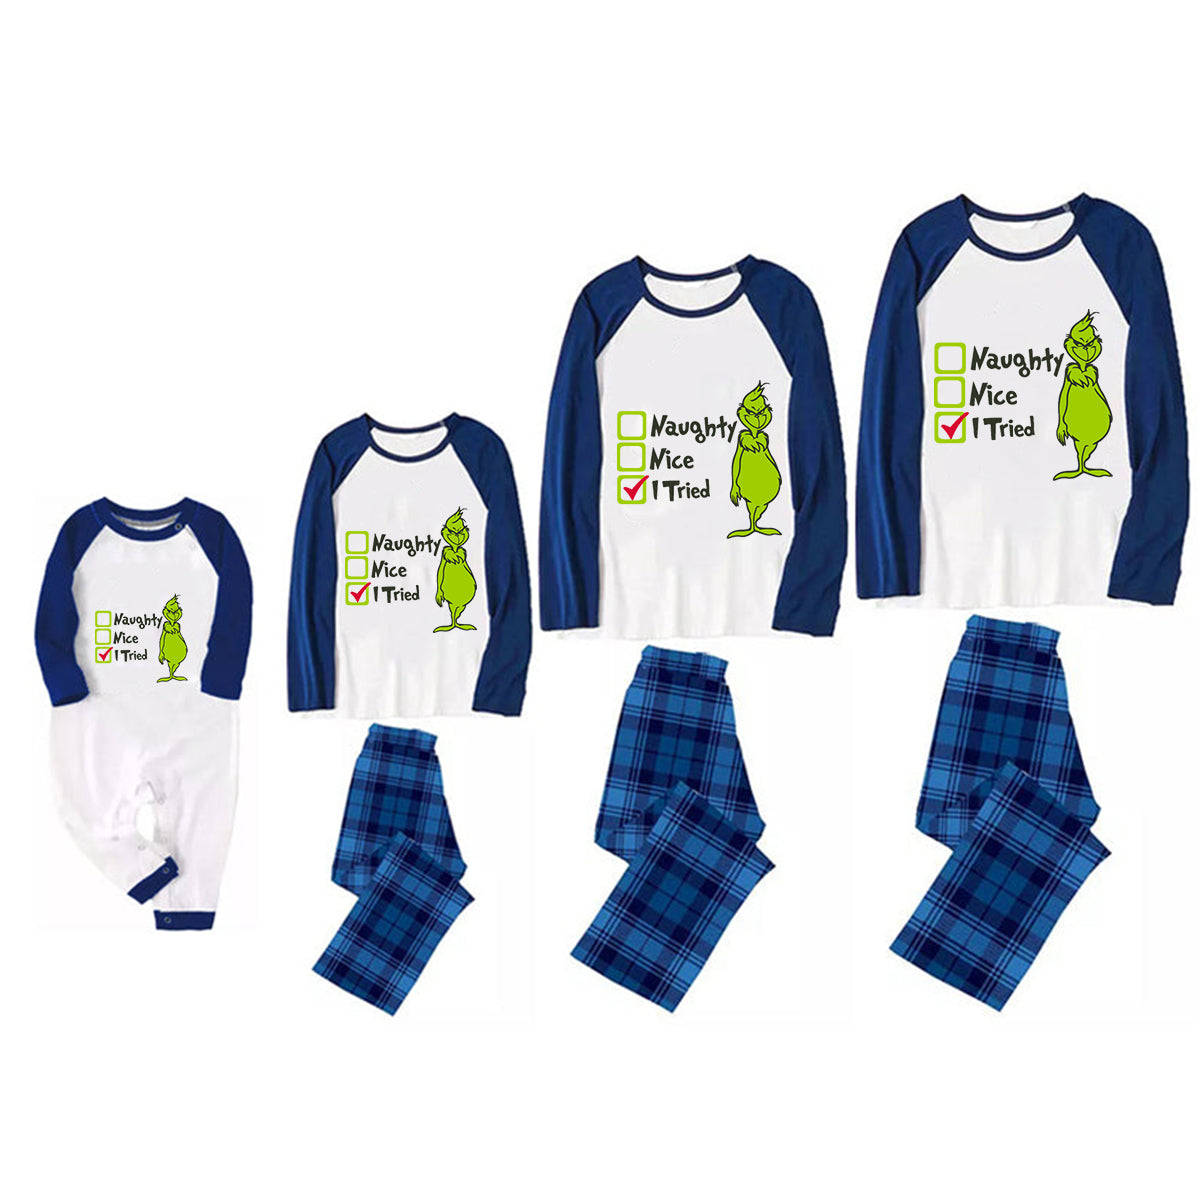 Christmas "Naughty&Nice& I Tried" Letter Print Patterned Casual Long Sleeve Sweatshirts Blue Sleeve Contrast Tops and Blue Plaid Pants Family Matching Pajamas Sets With Pet Bandan